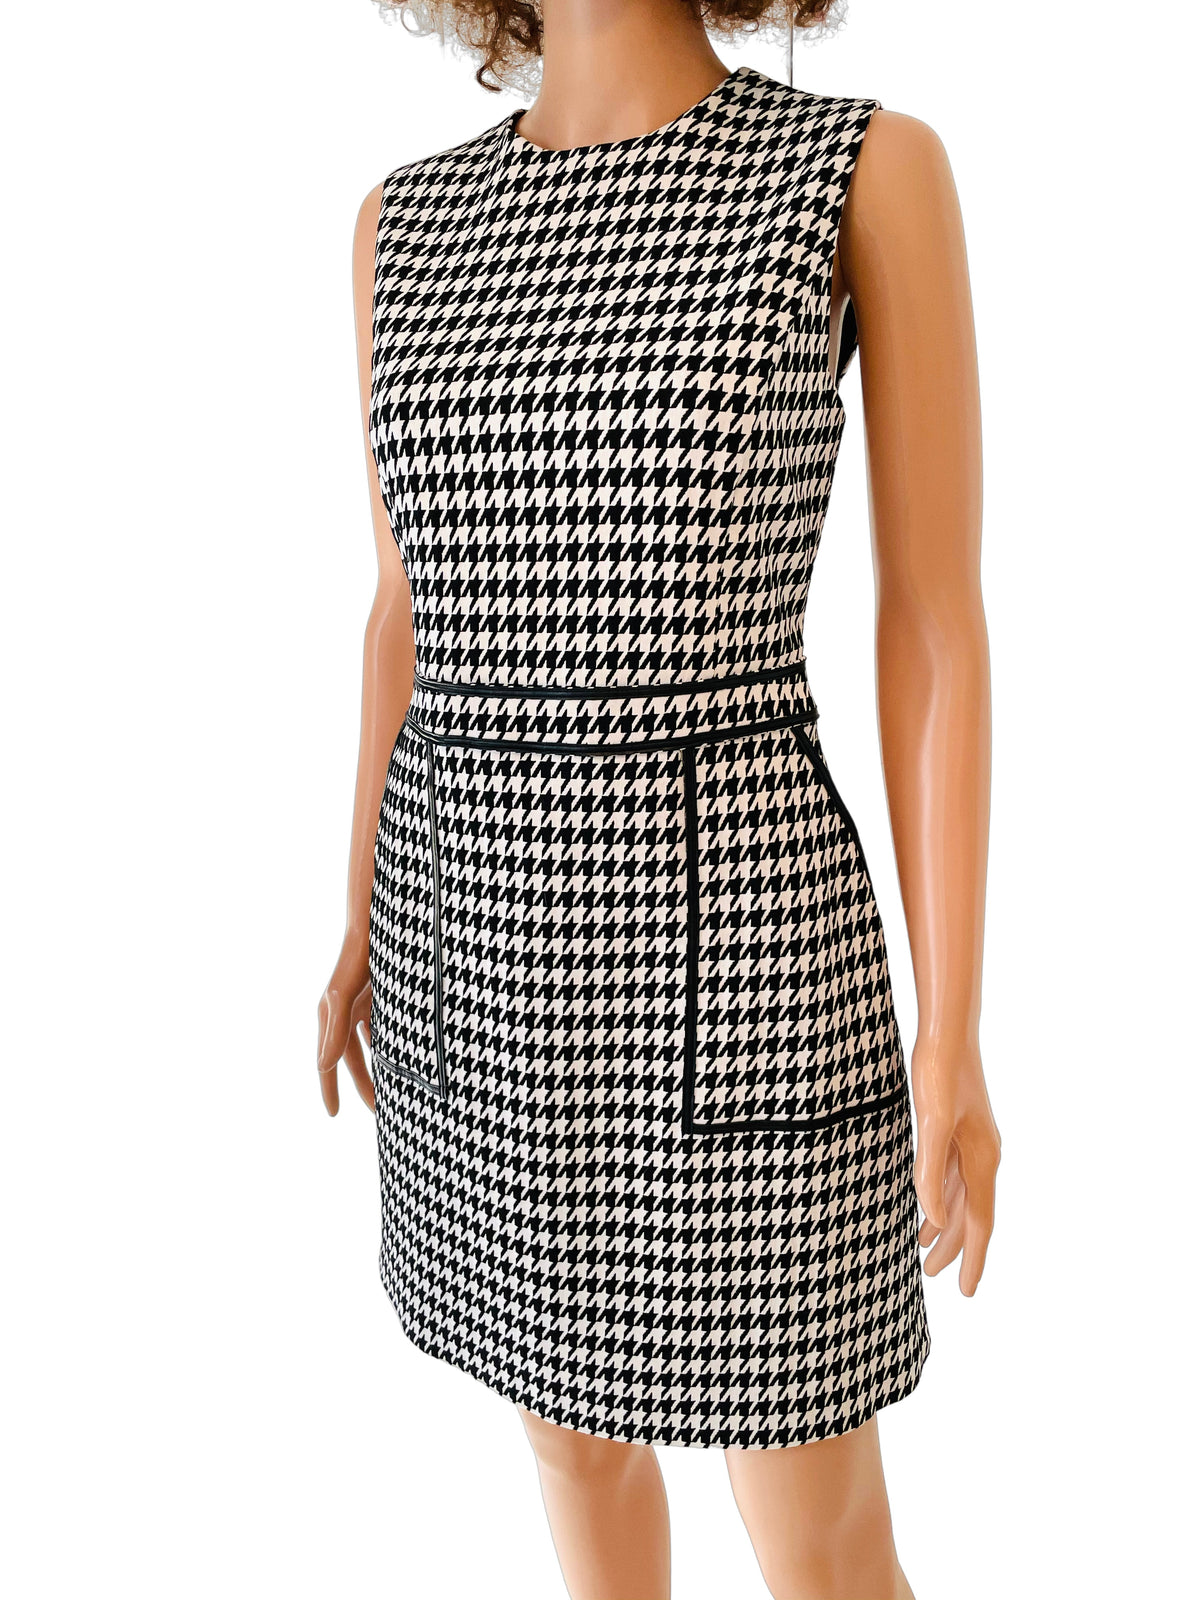 Dogtooth 1960's Style Dress